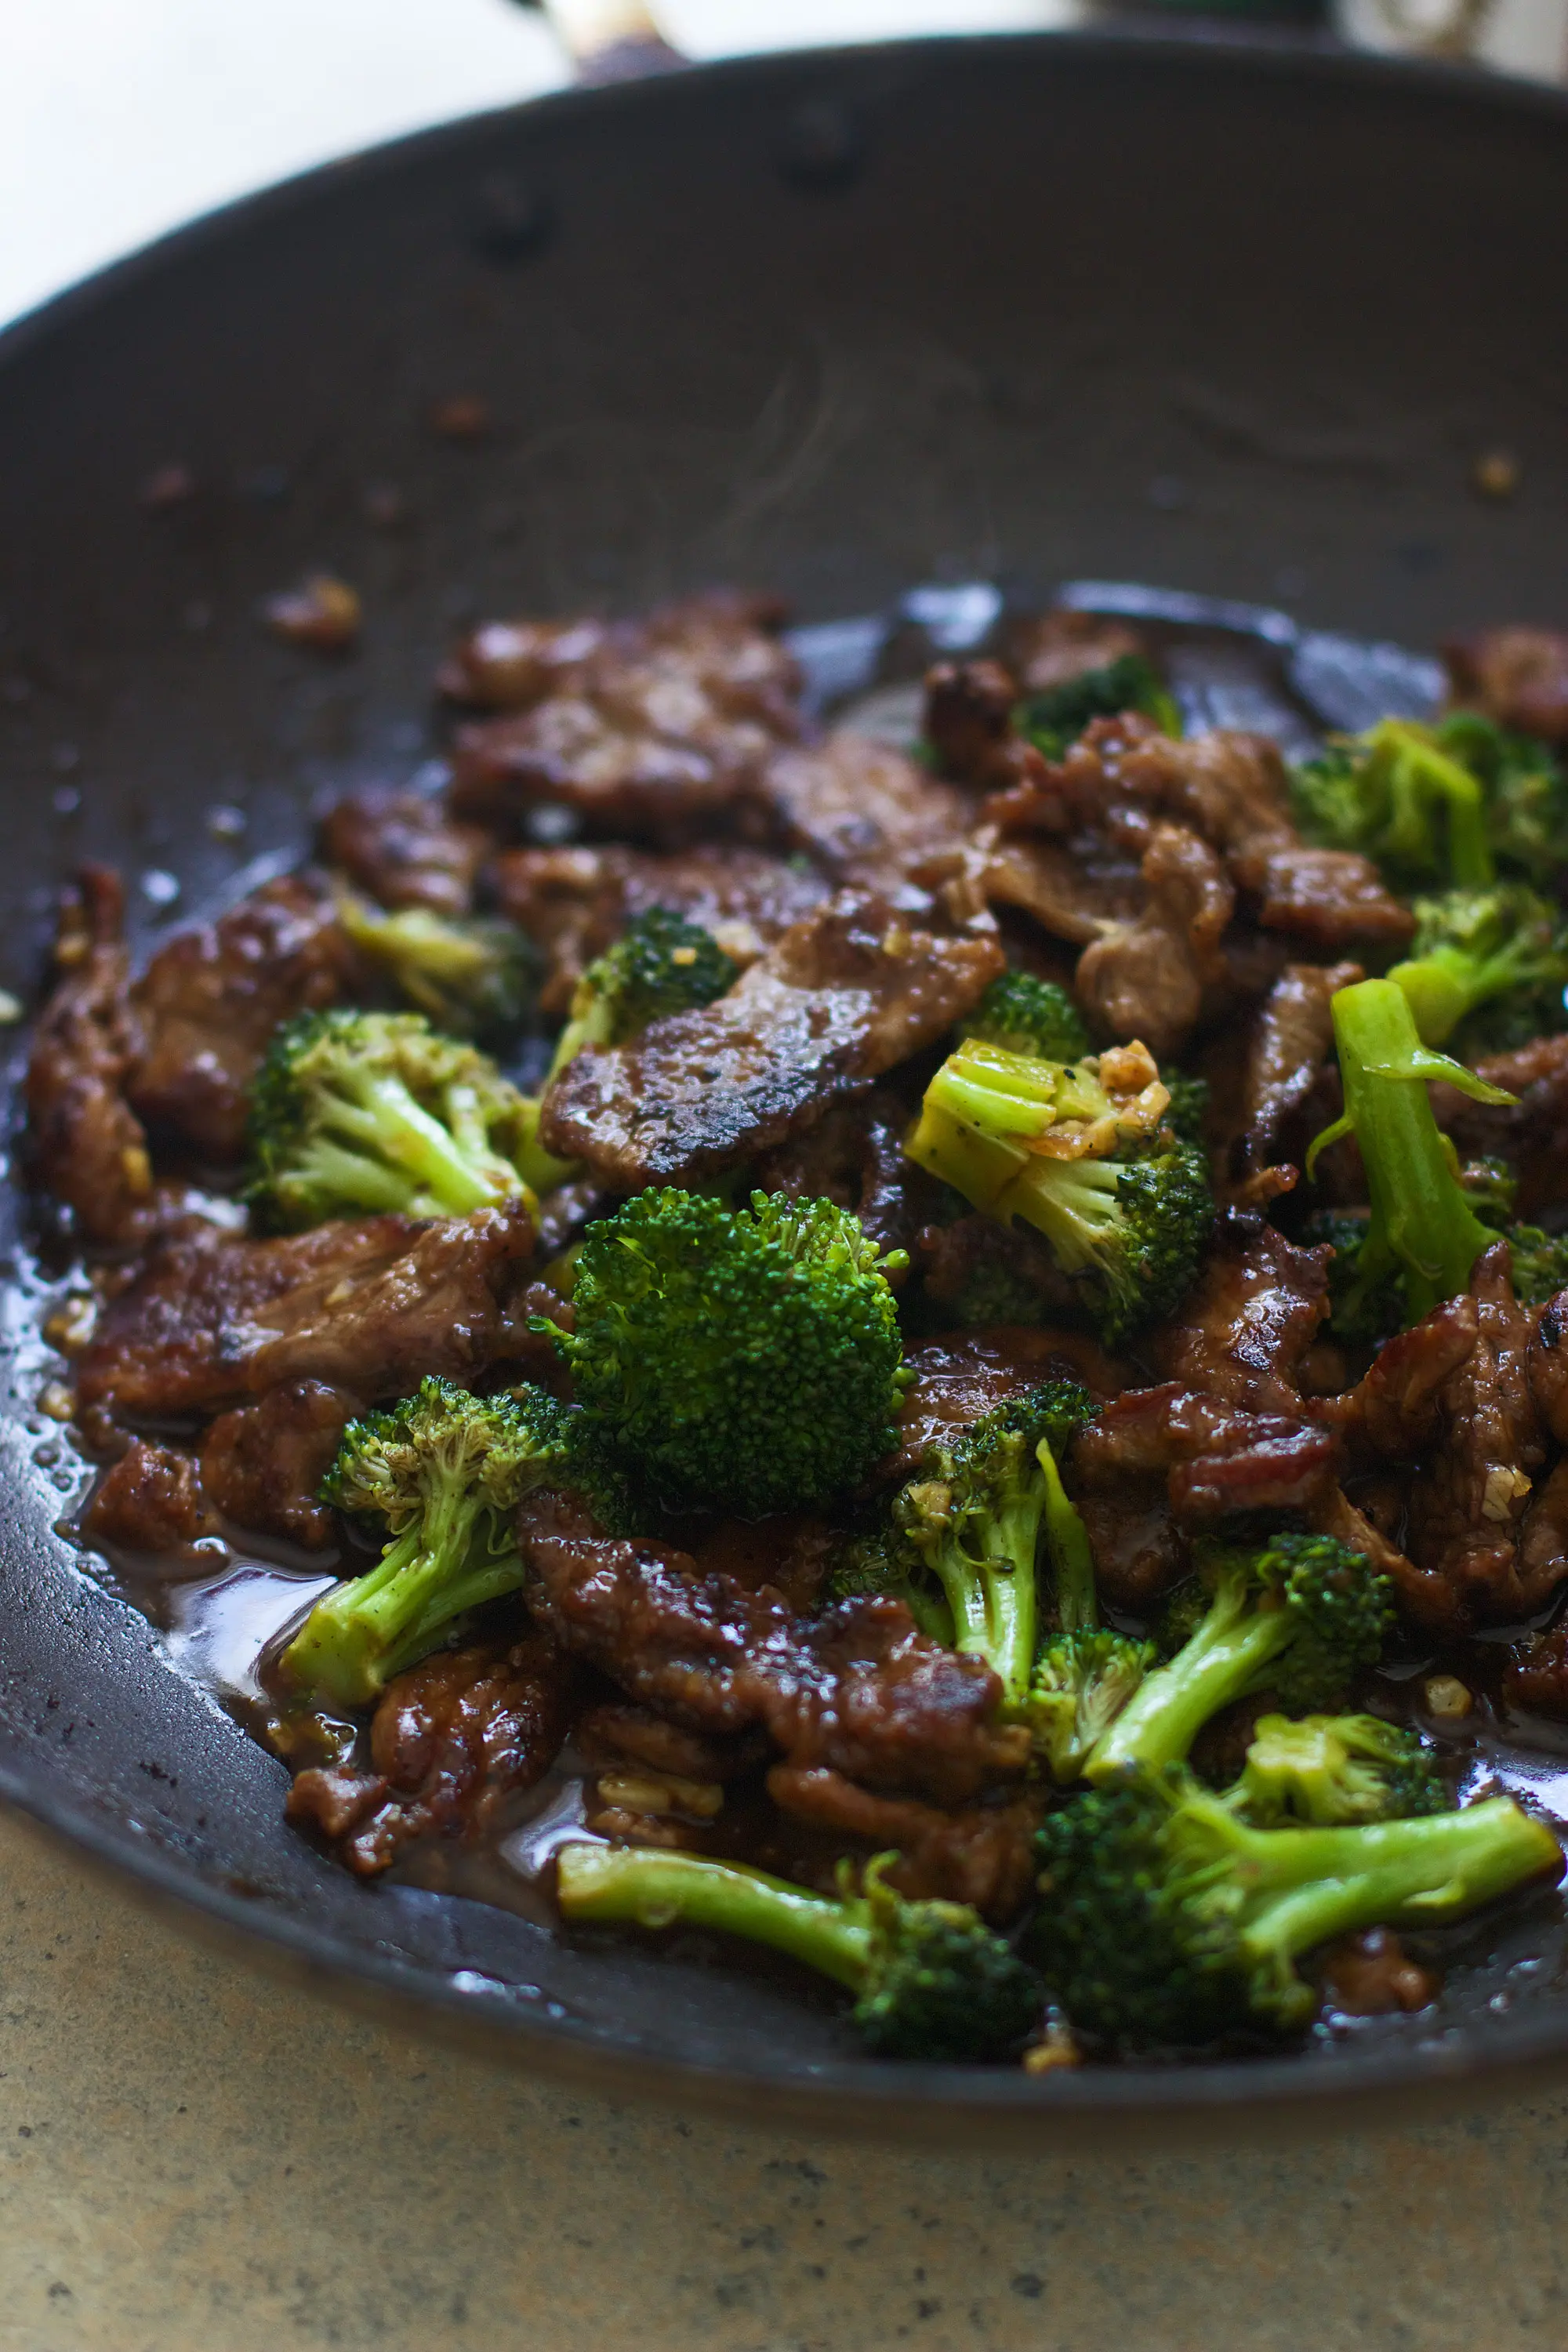 Easy Beef with Broccoli - Comes together in under 30 minutes, is lightened-up and SO much better than takeout!